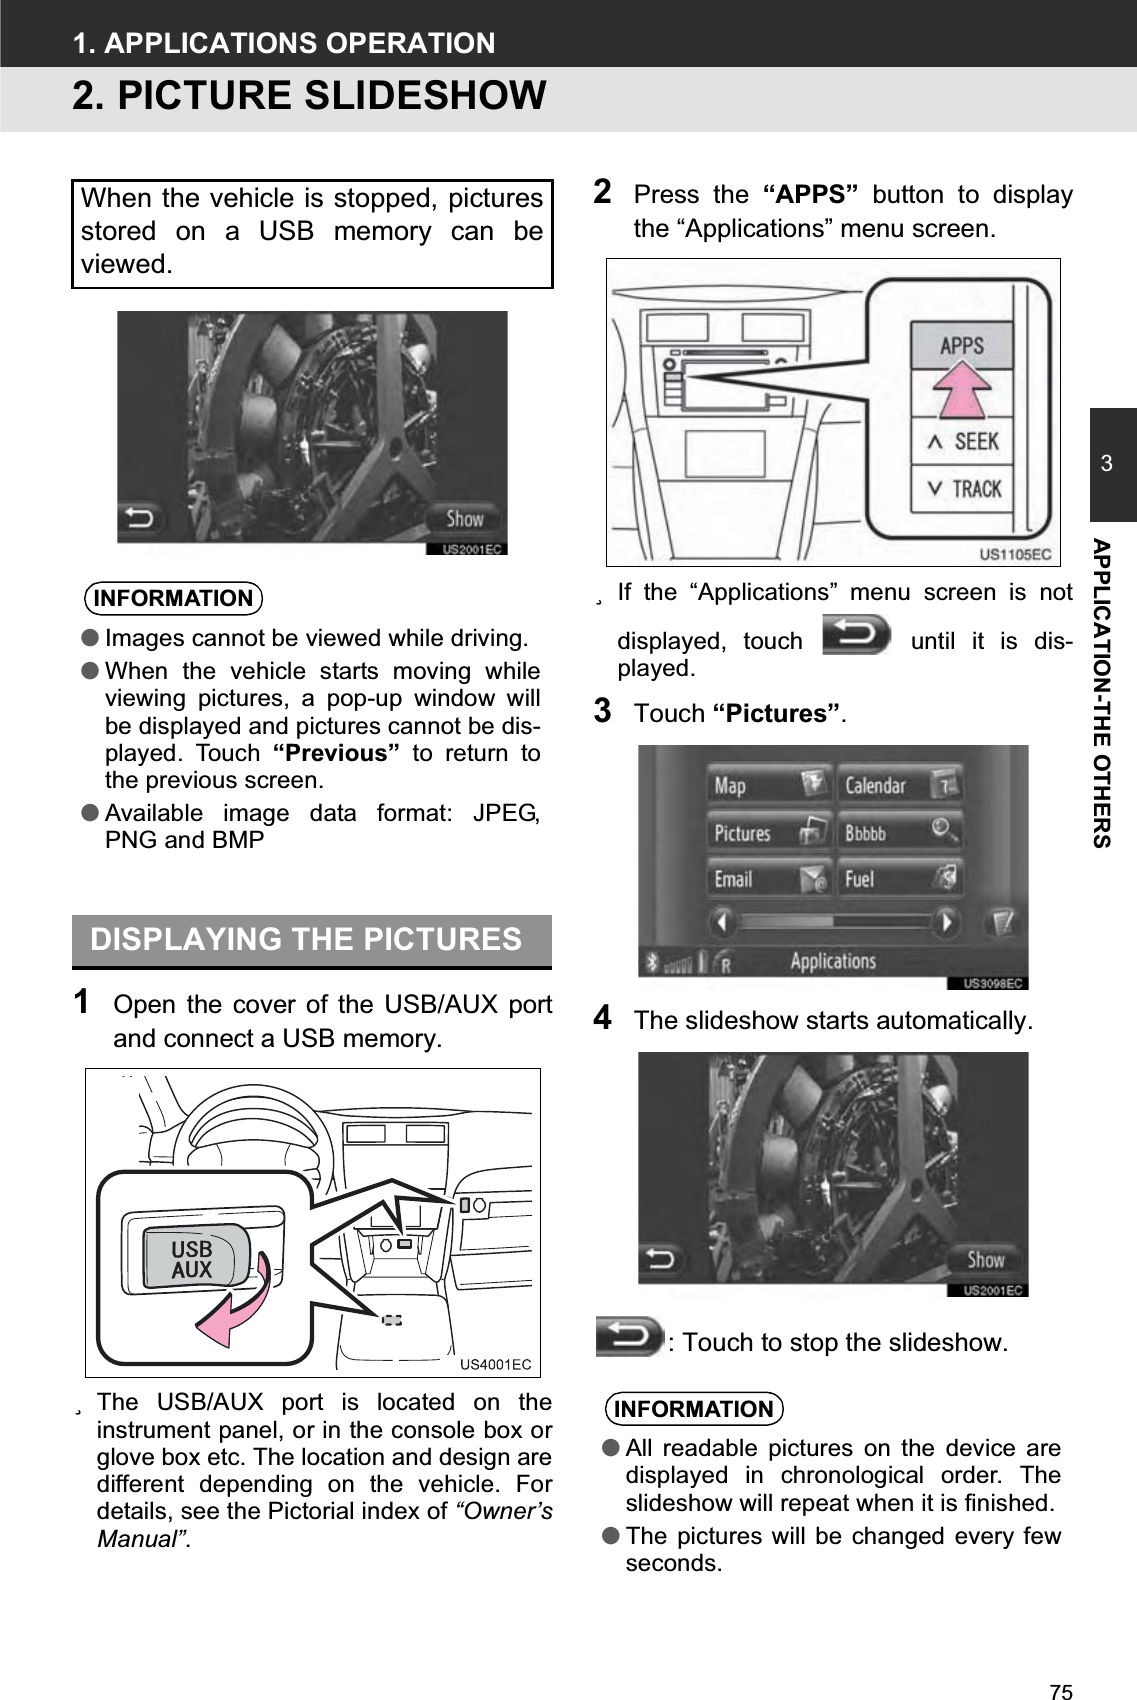 753APPLICATION-THE OTHERS1. APPLICATIONS OPERATION2. PICTURE SLIDESHOW1Open the cover of the USB/AUX portand connect a USB memory.zThe USB/AUX port is located on theinstrument panel, or in the console box orglove box etc. The location and design aredifferent depending on the vehicle. Fordetails, see the Pictorial index of “Owner’sManual”.2Press the “APPS” button to displaythe “Applications” menu screen.zIf the “Applications” menu screen is notdisplayed, touch   until it is dis-played.3Touch “Pictures”.4The slideshow starts automatically.: Touch to stop the slideshow.When the vehicle is stopped, picturesstored on a USB memory can beviewed.INFORMATION●Images cannot be viewed while driving.●When the vehicle starts moving whileviewing pictures, a pop-up window willbe displayed and pictures cannot be dis-played. Touch “Previous” to return tothe previous screen.●Available image data format: JPEG,PNG and BMPDISPLAYING THE PICTURESINFORMATION●All readable pictures on the device aredisplayed in chronological order. Theslideshow will repeat when it is finished.●The pictures will be changed every fewseconds.